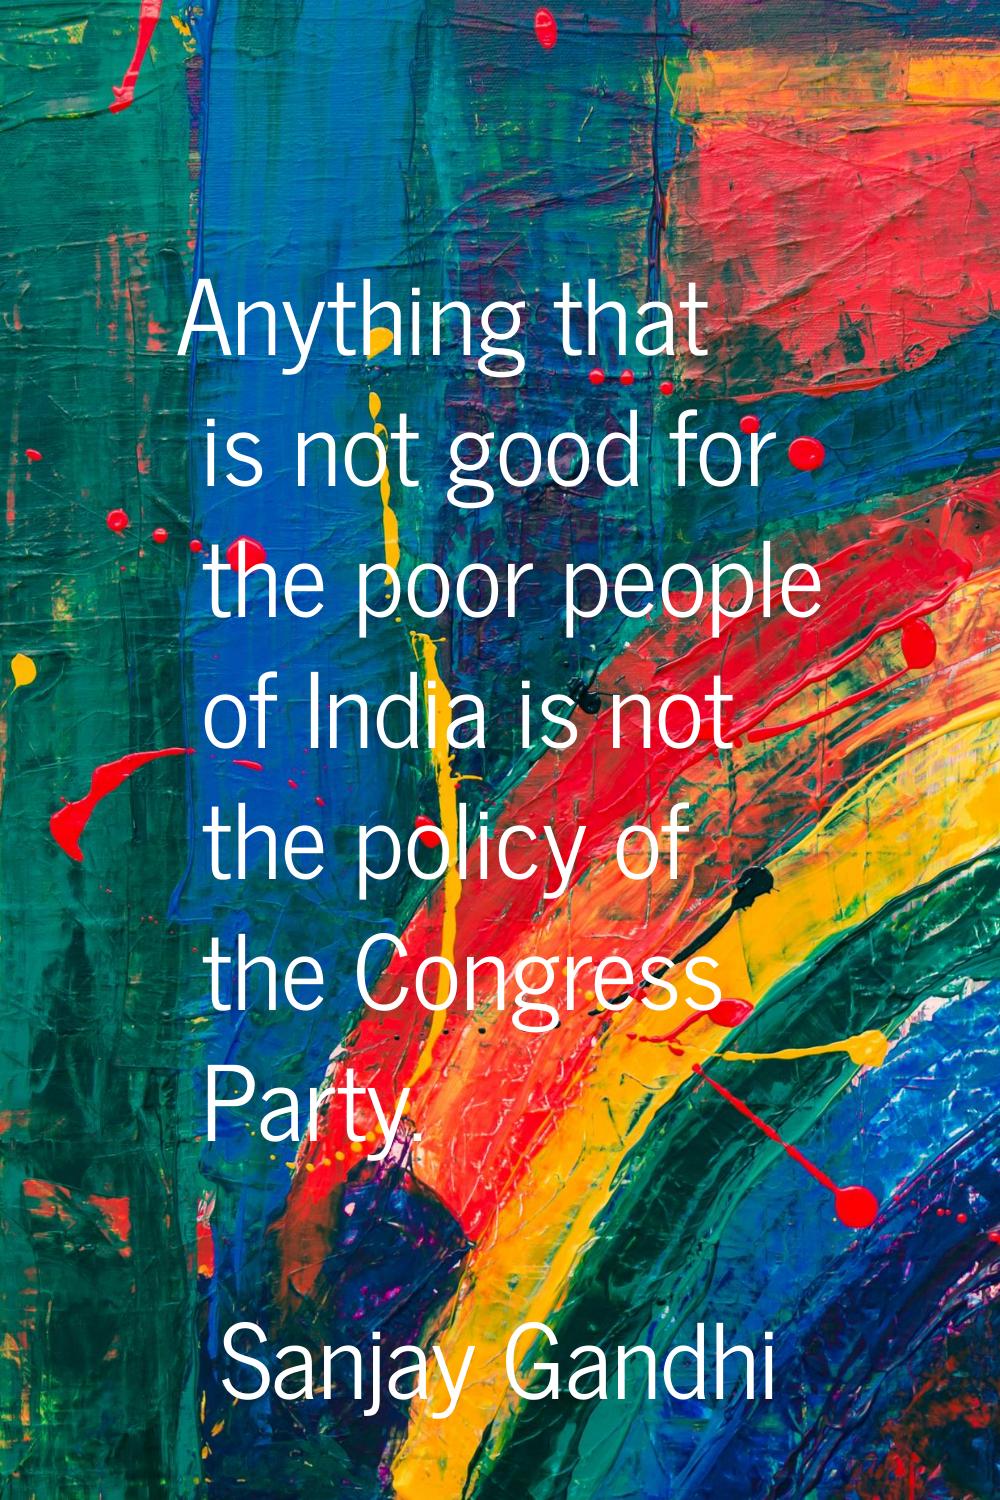 Anything that is not good for the poor people of India is not the policy of the Congress Party.